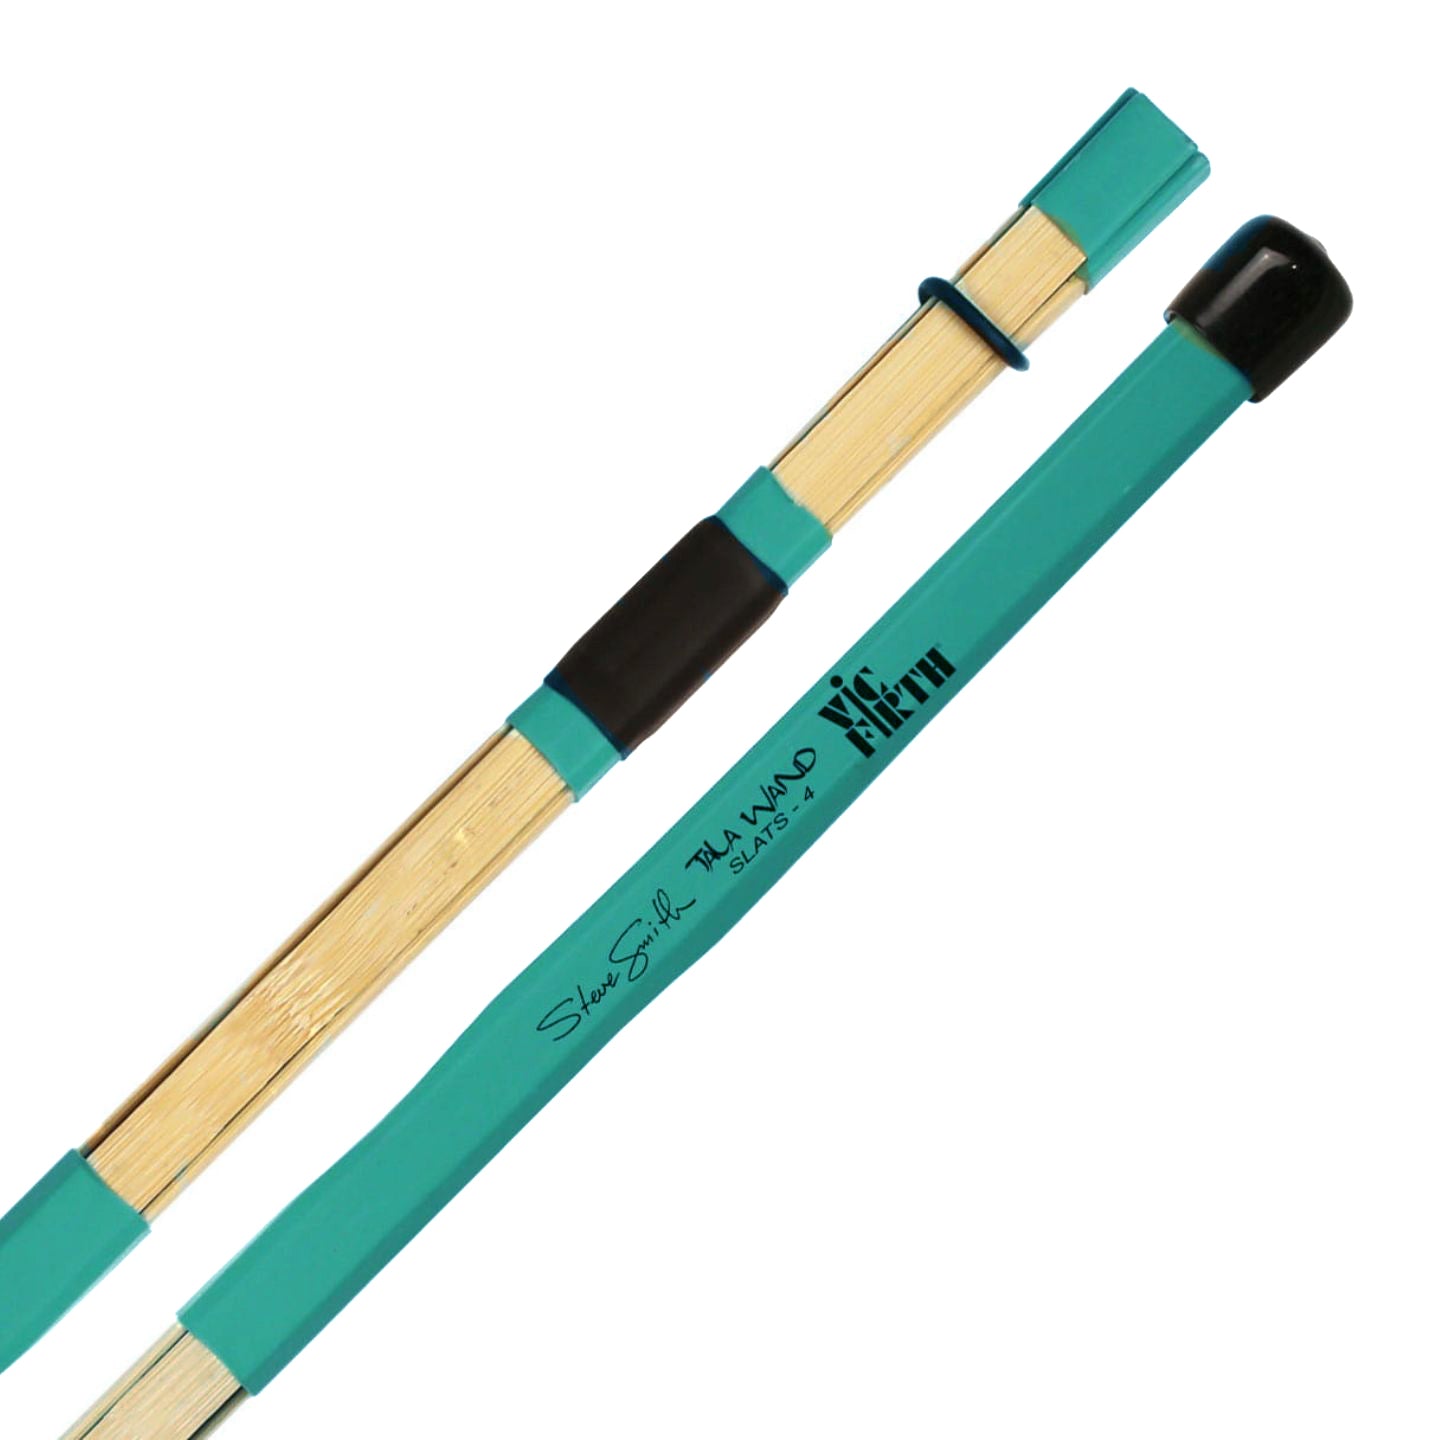 Vic Firth Steve Smith Tala Wand Drumstick with 4 Bamboo Slats, Foam Core, Plastic-Wrapped Handles for Drums | TW4